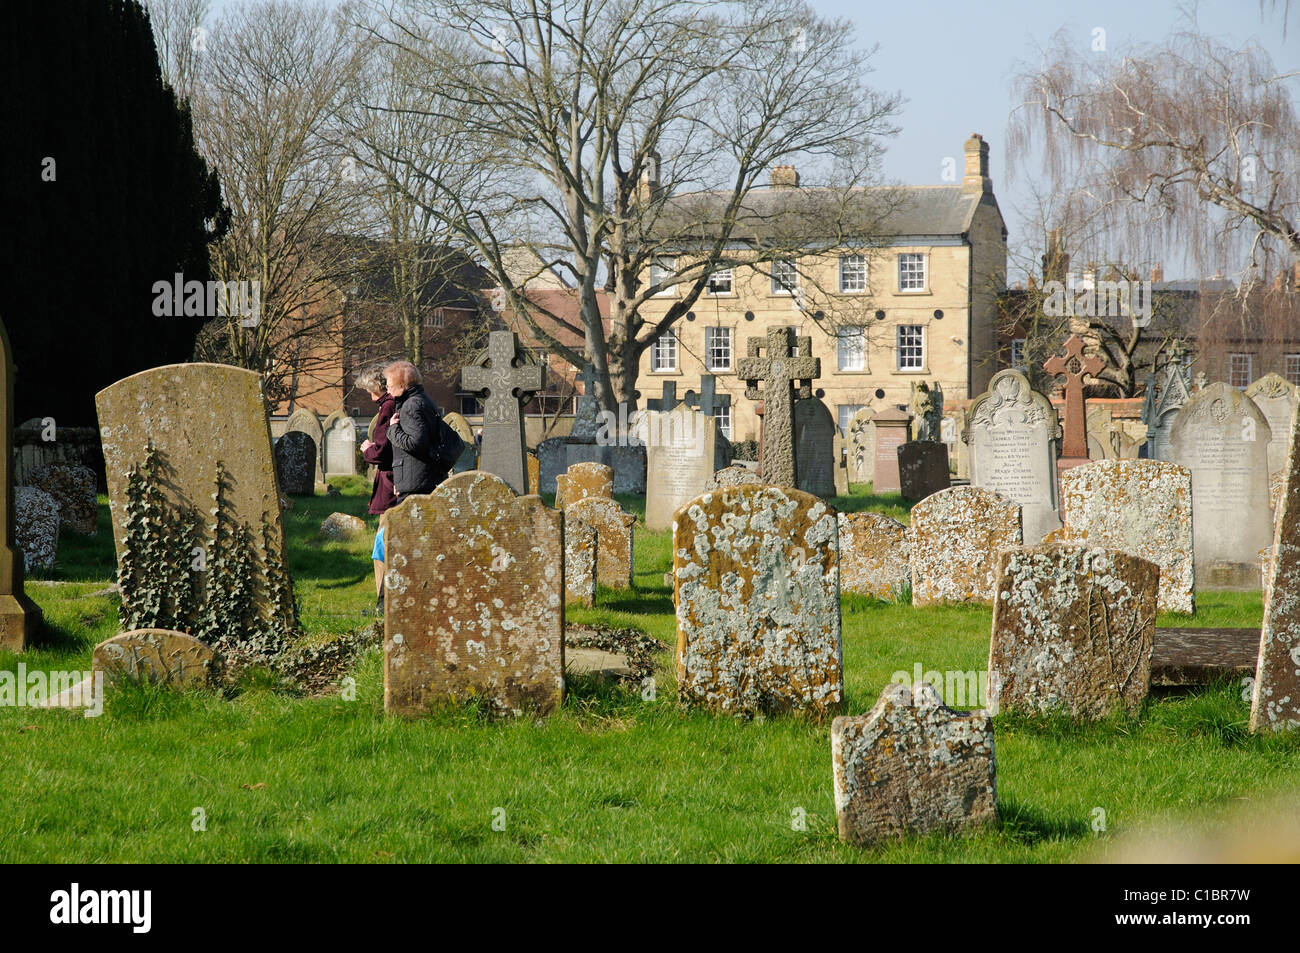 Graveyard and women walking to church at St Peter & St Paul Church in Olney Buckinghamshire England UK Stock Photo